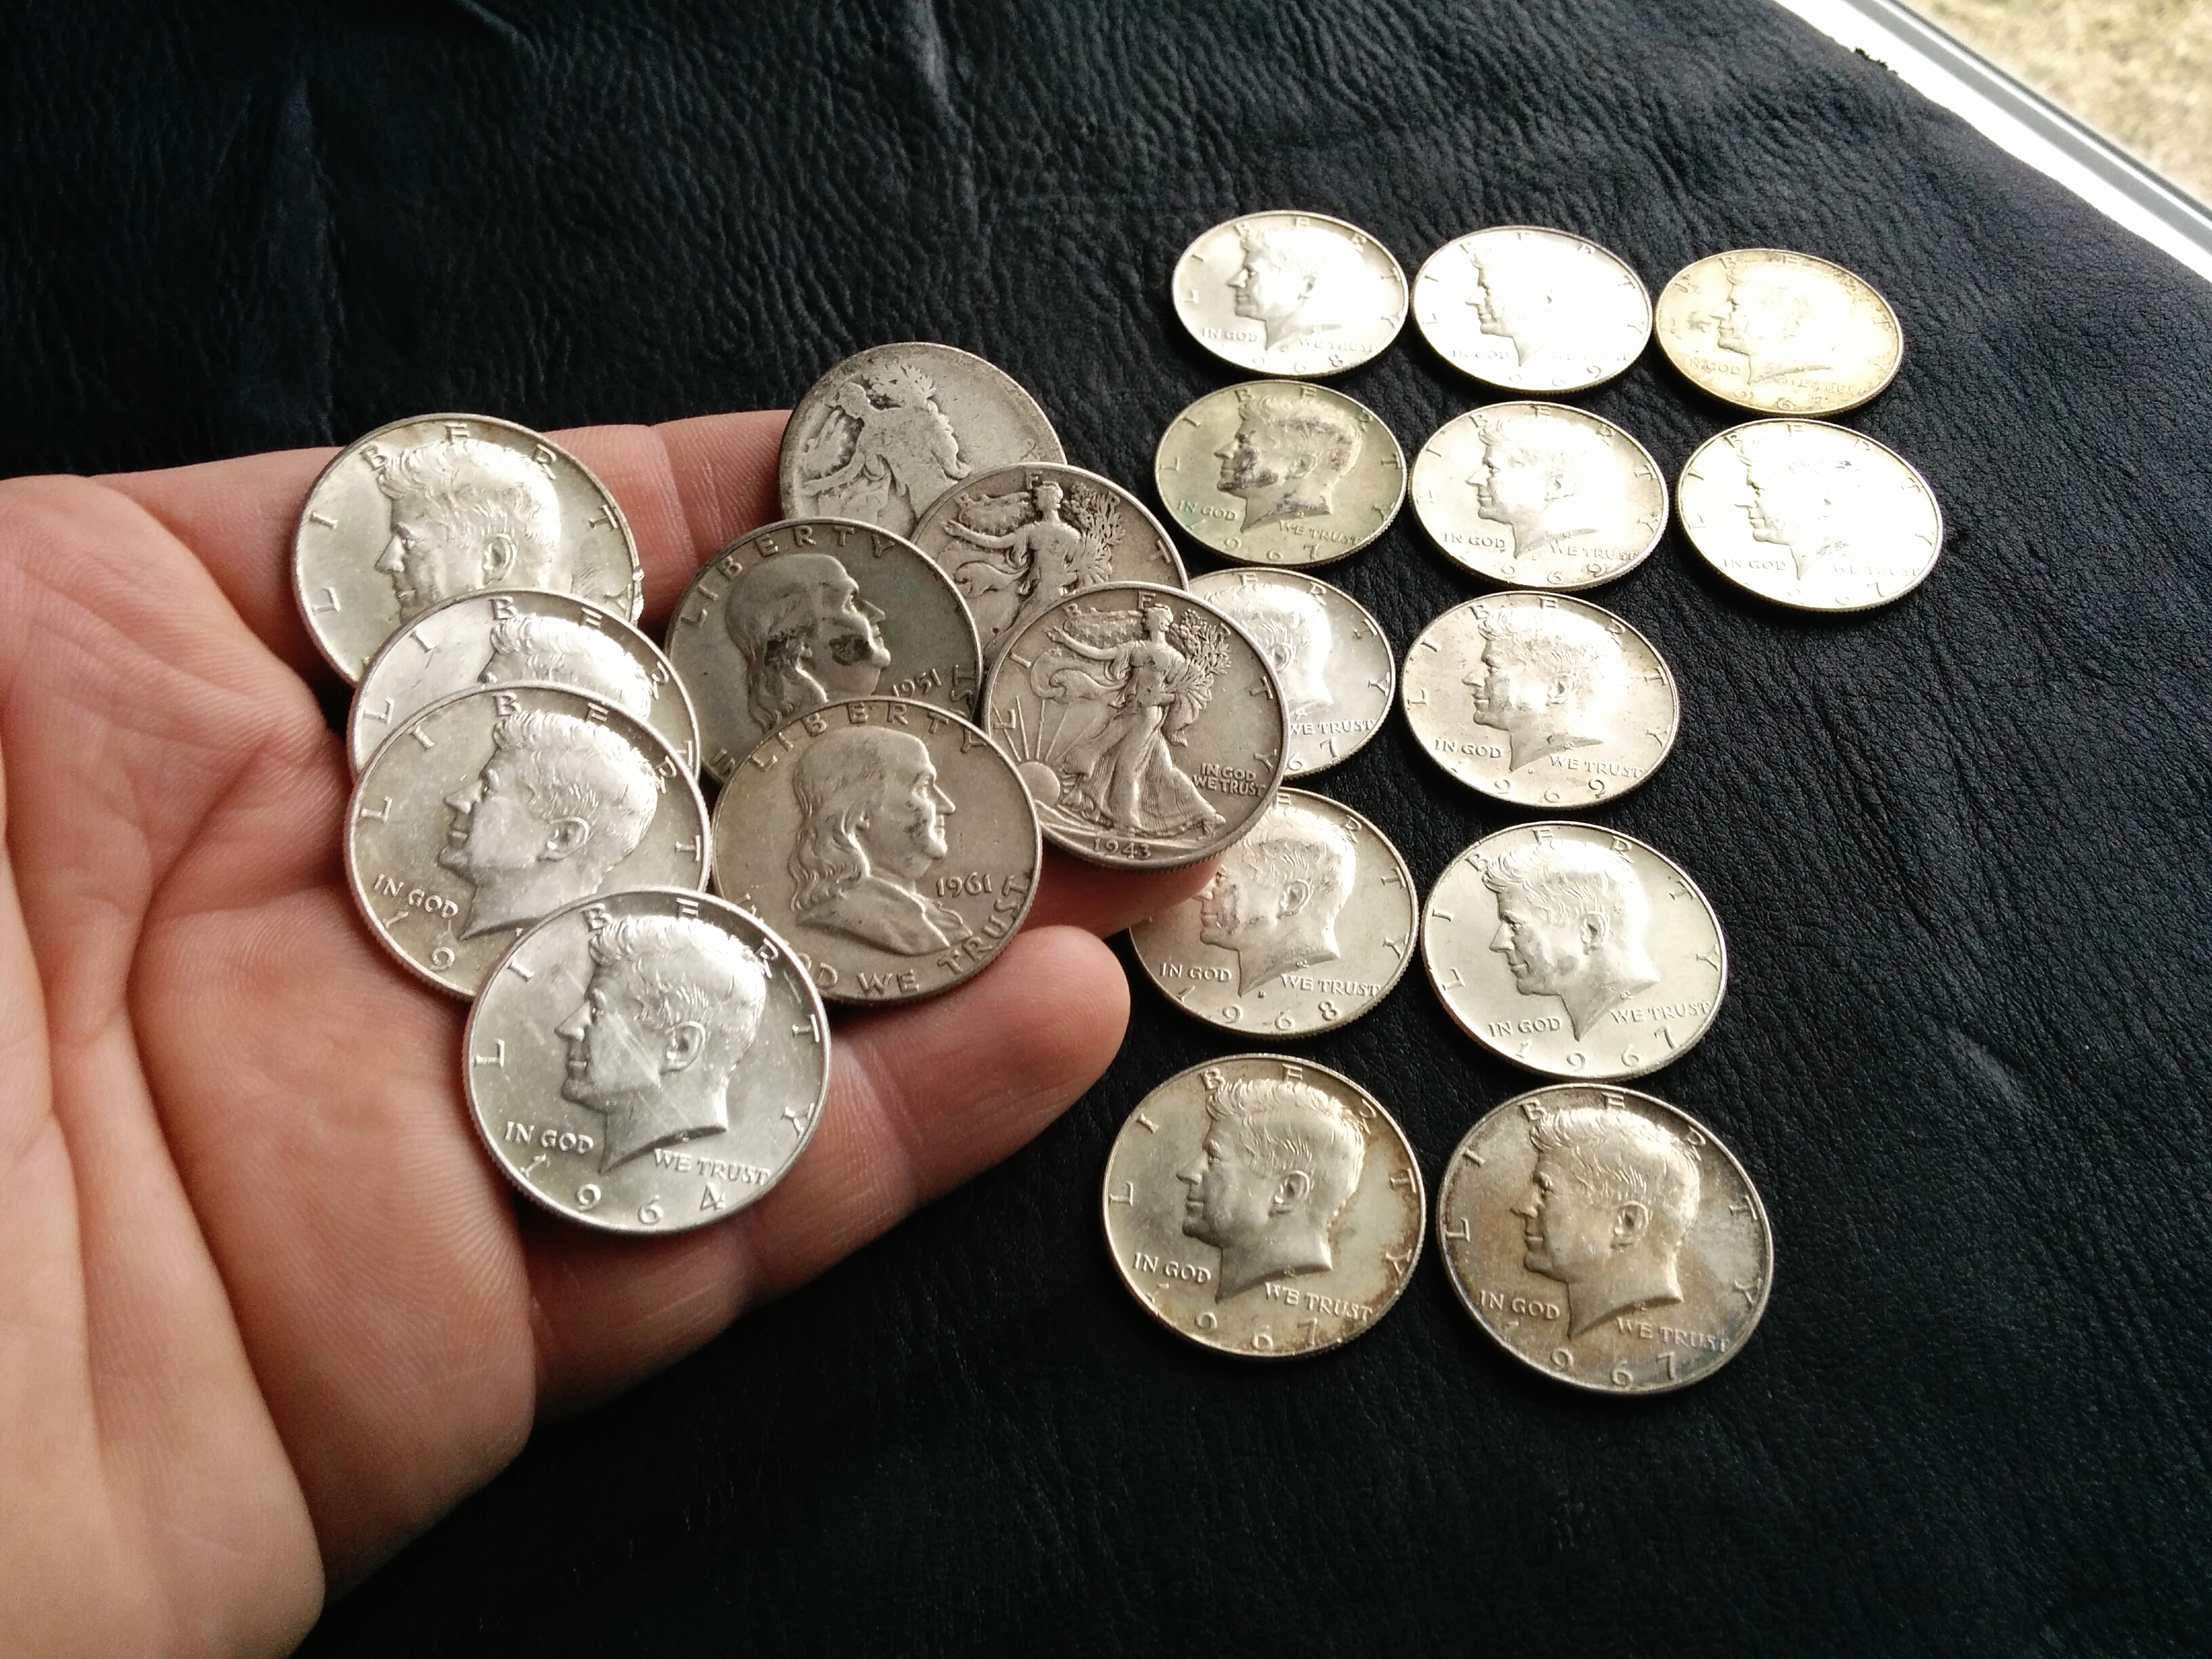 Haven't been able to go coin roll hunting a whole lot recently